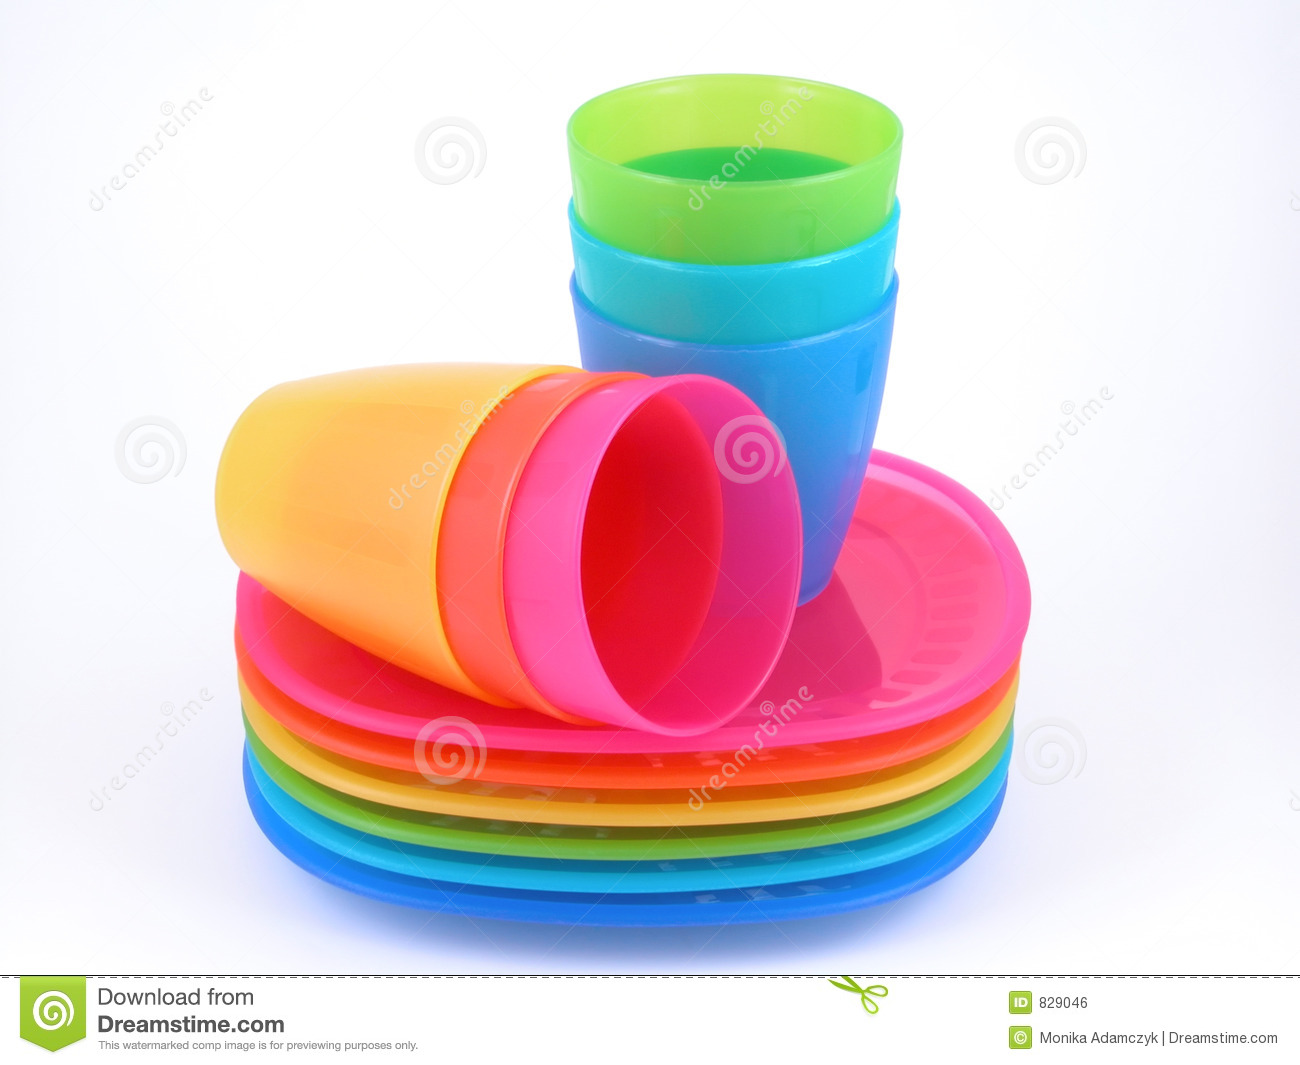 Plastic Cups And Plates Royalty Free Stock Image   Image  829046